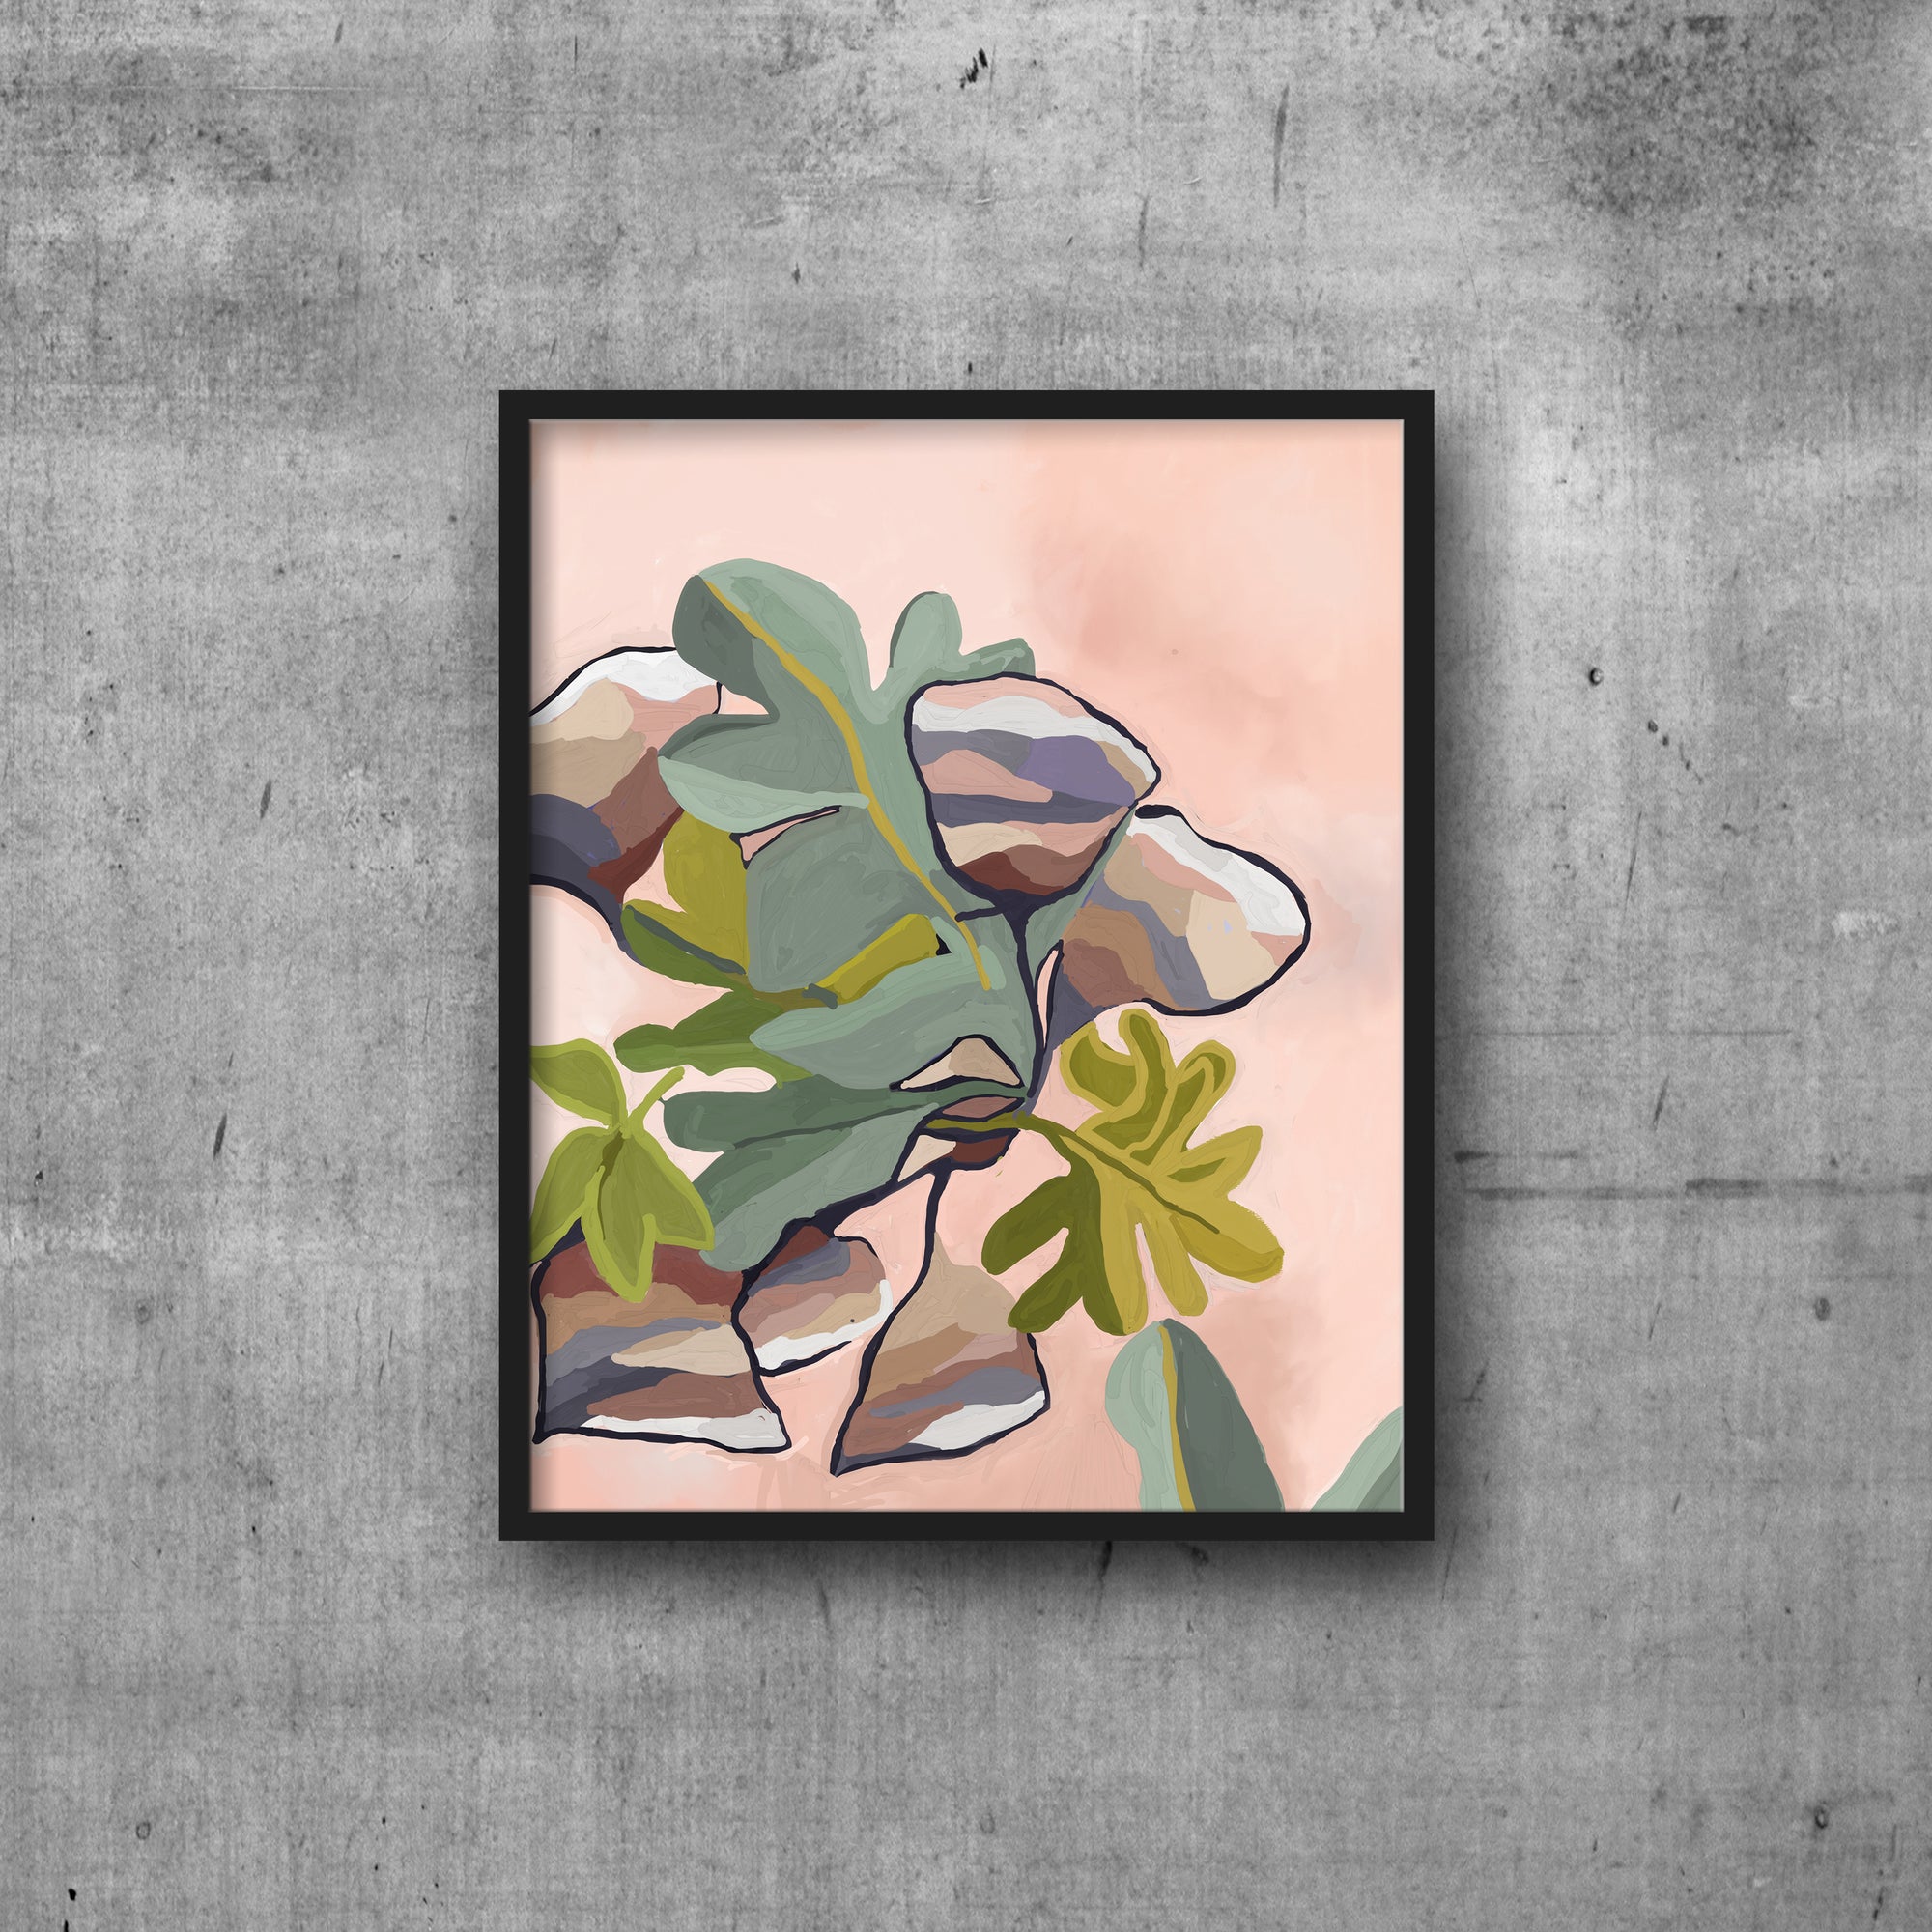 Pods and Leaves Art Print in black frame.